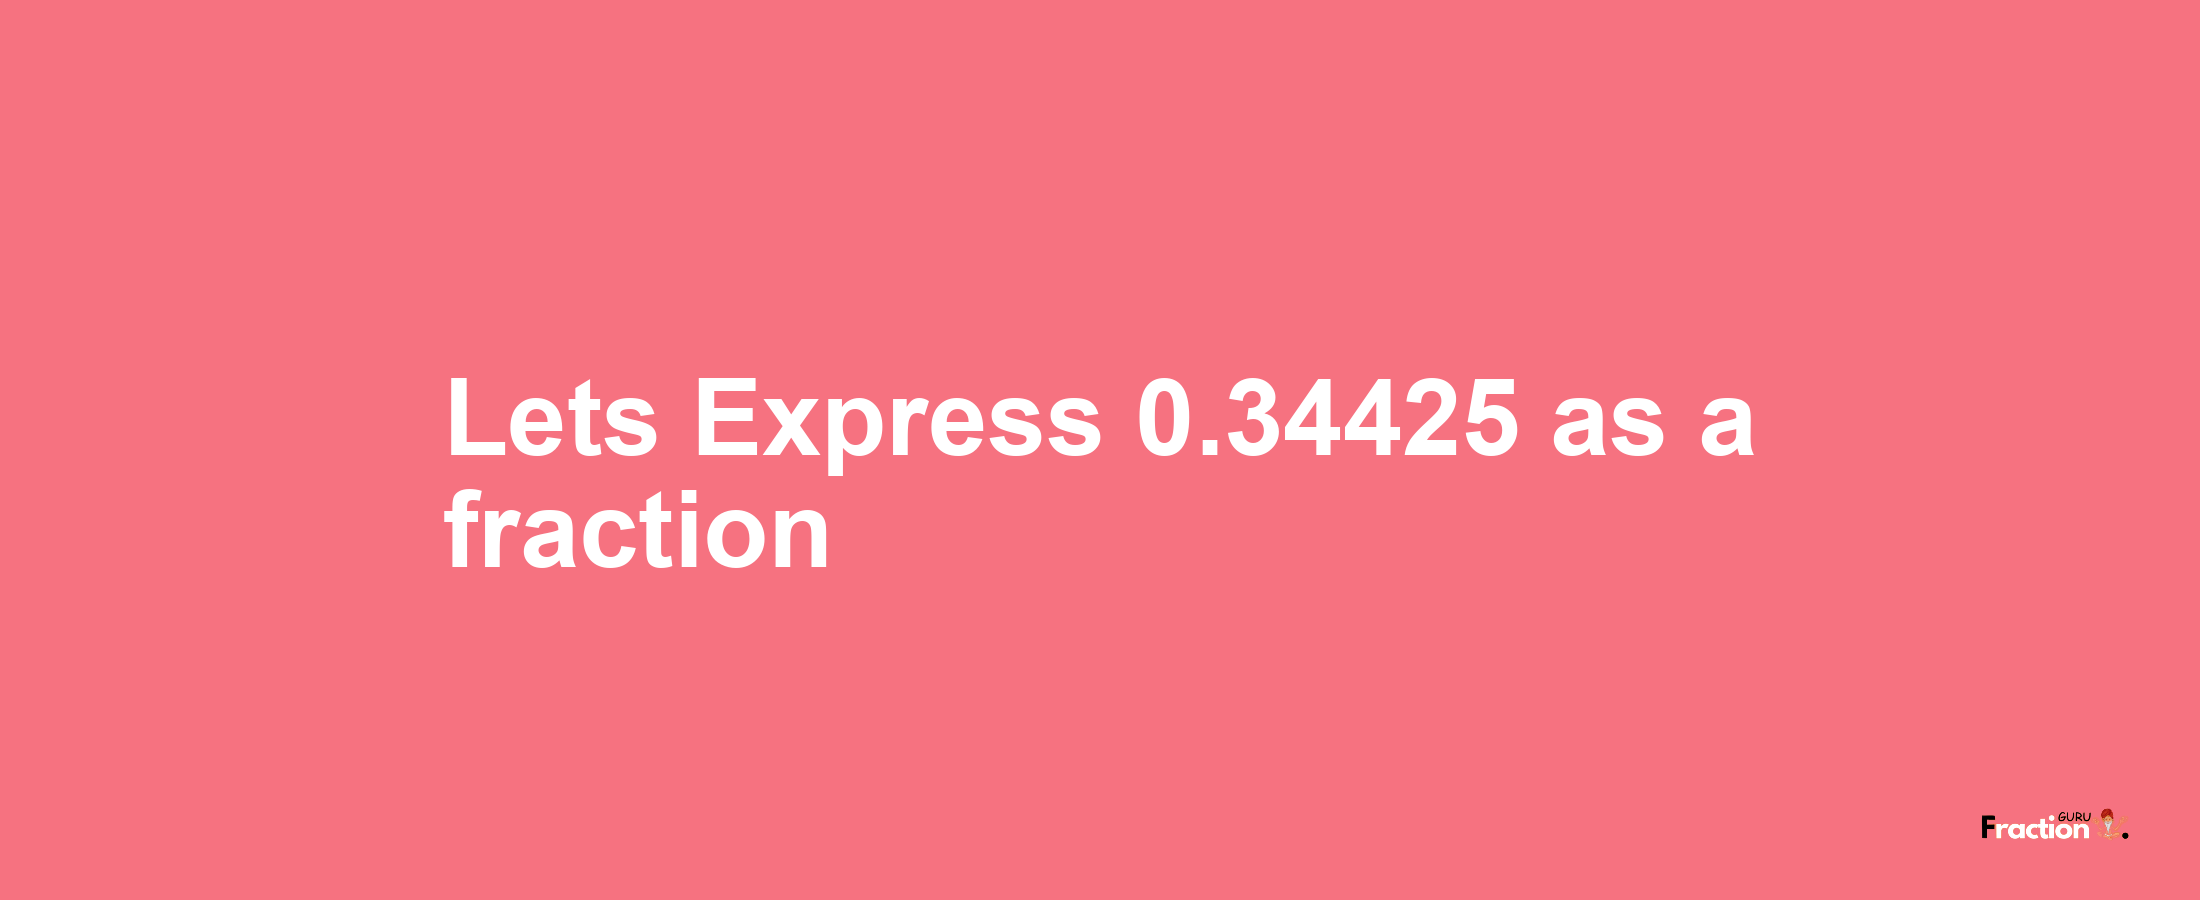 Lets Express 0.34425 as afraction